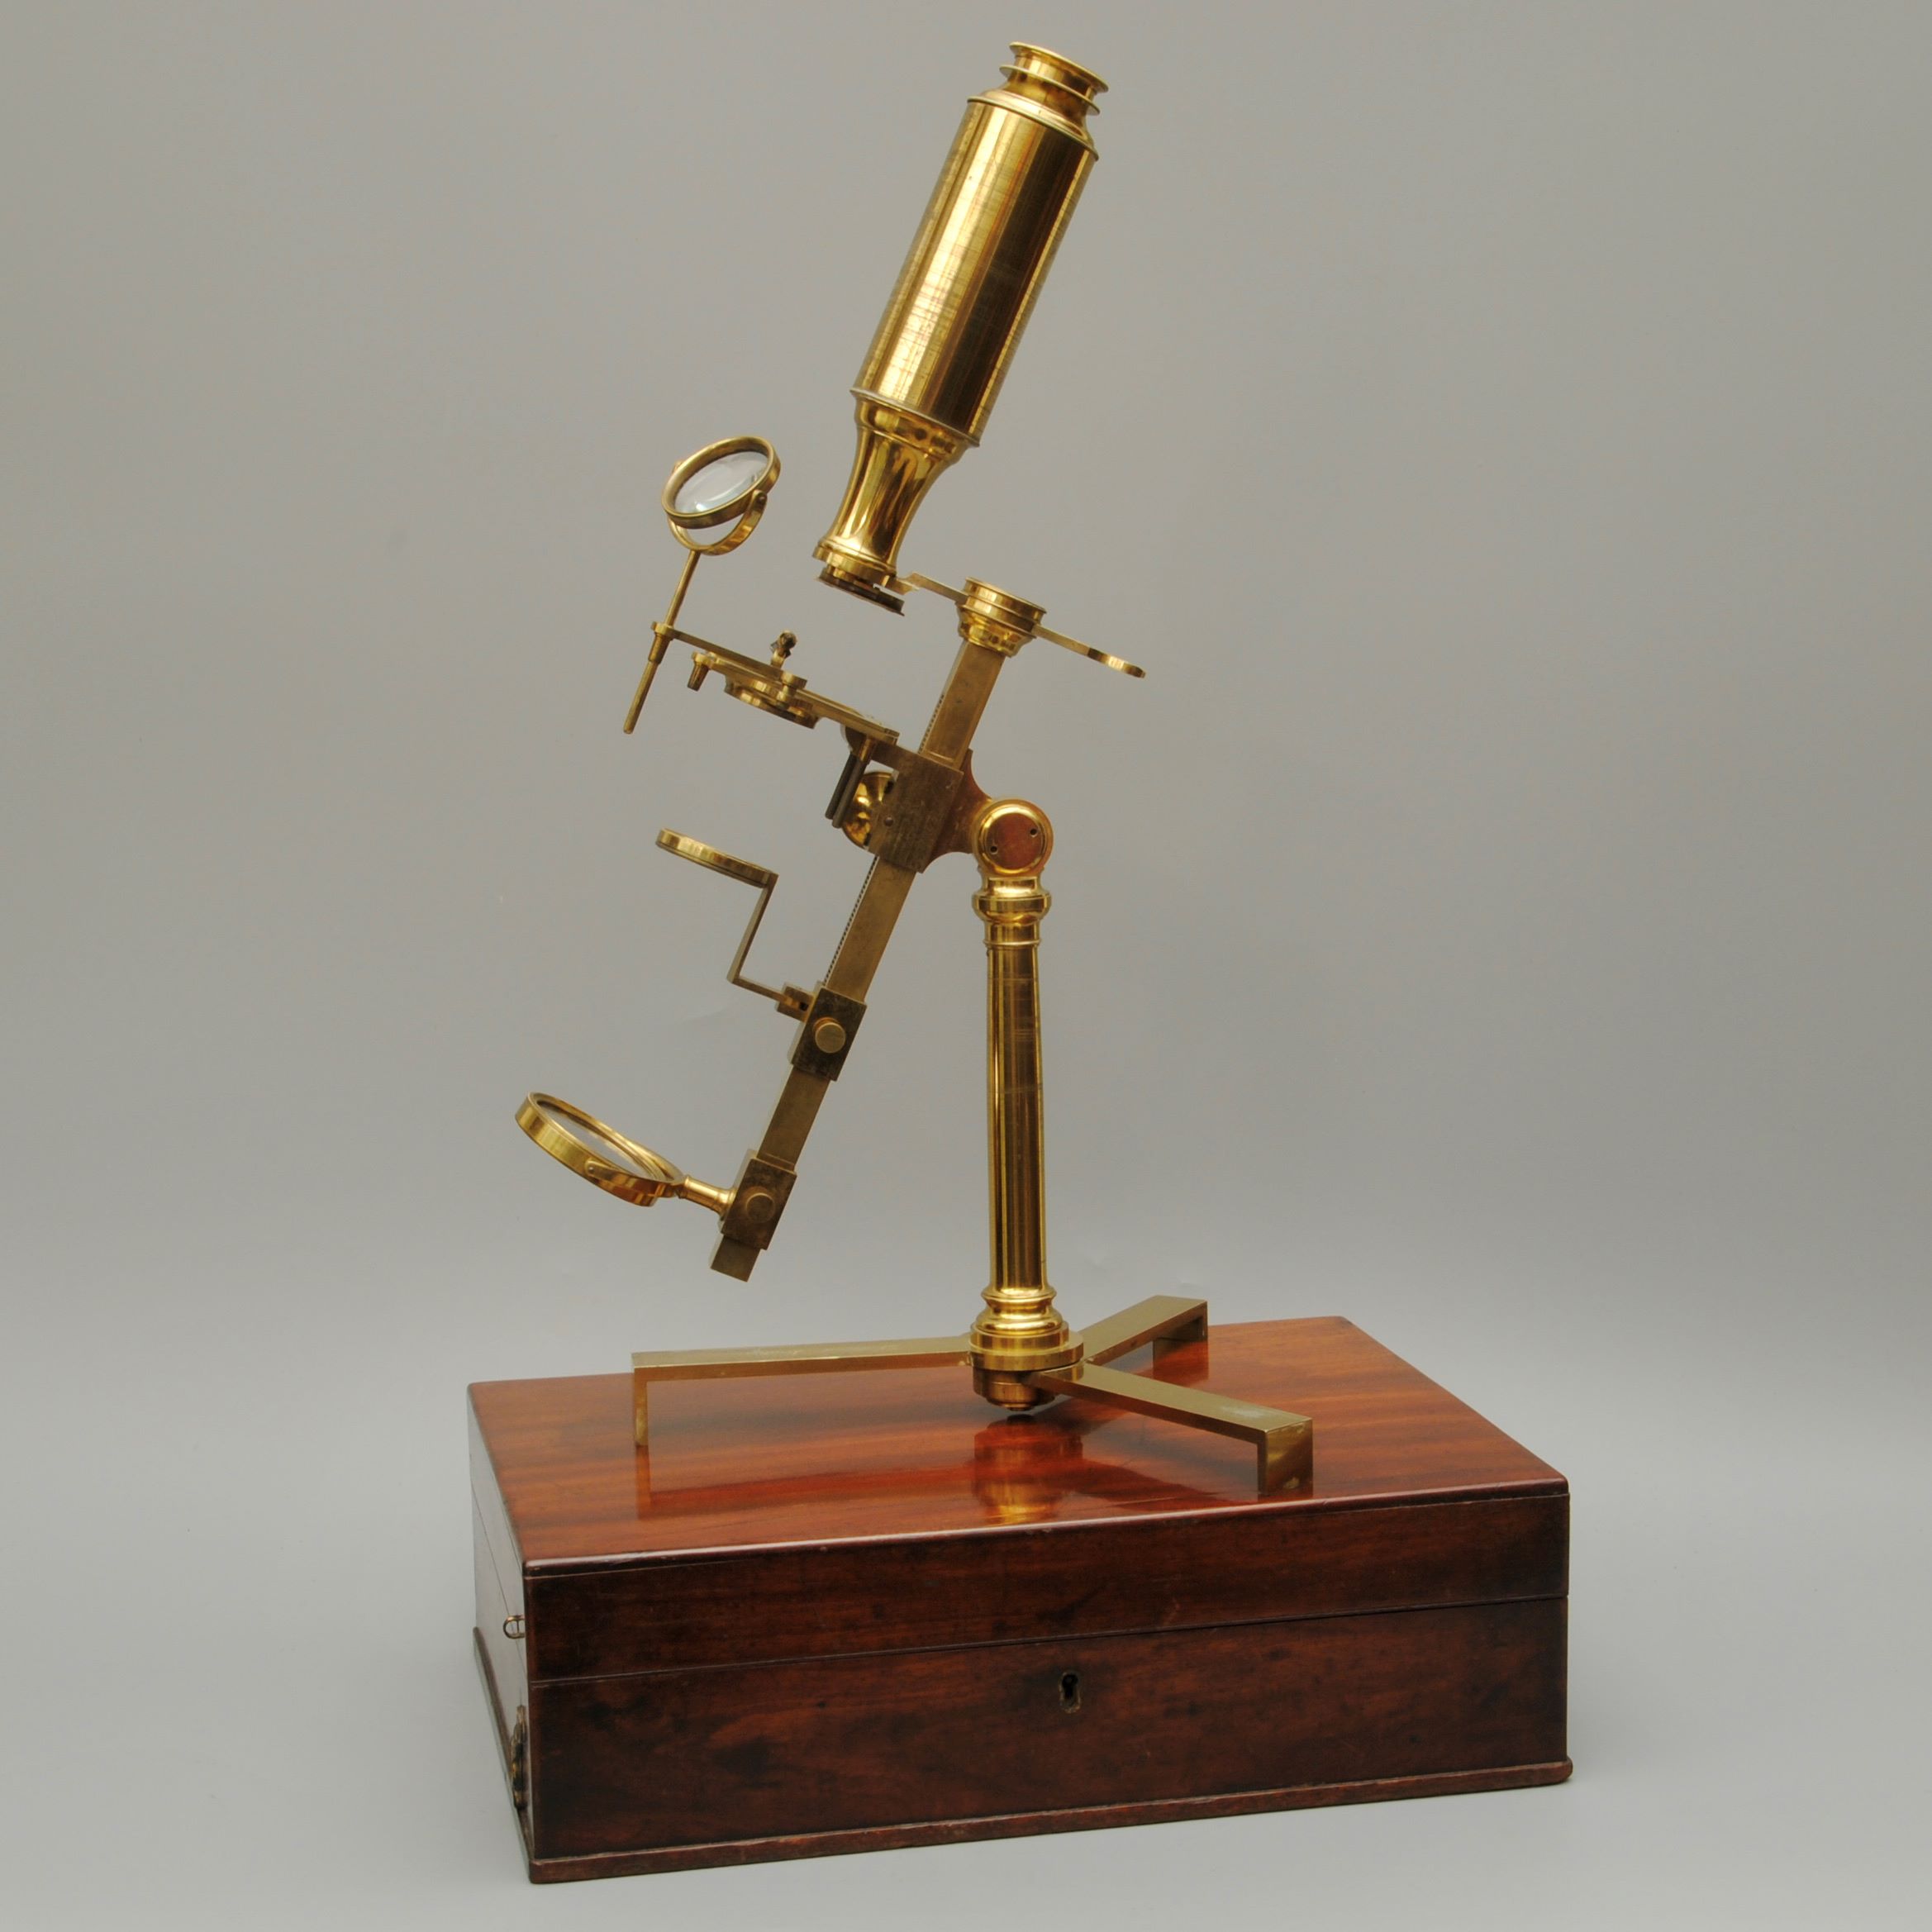 Who Invented The First Crude Microscope By Grinding Glass